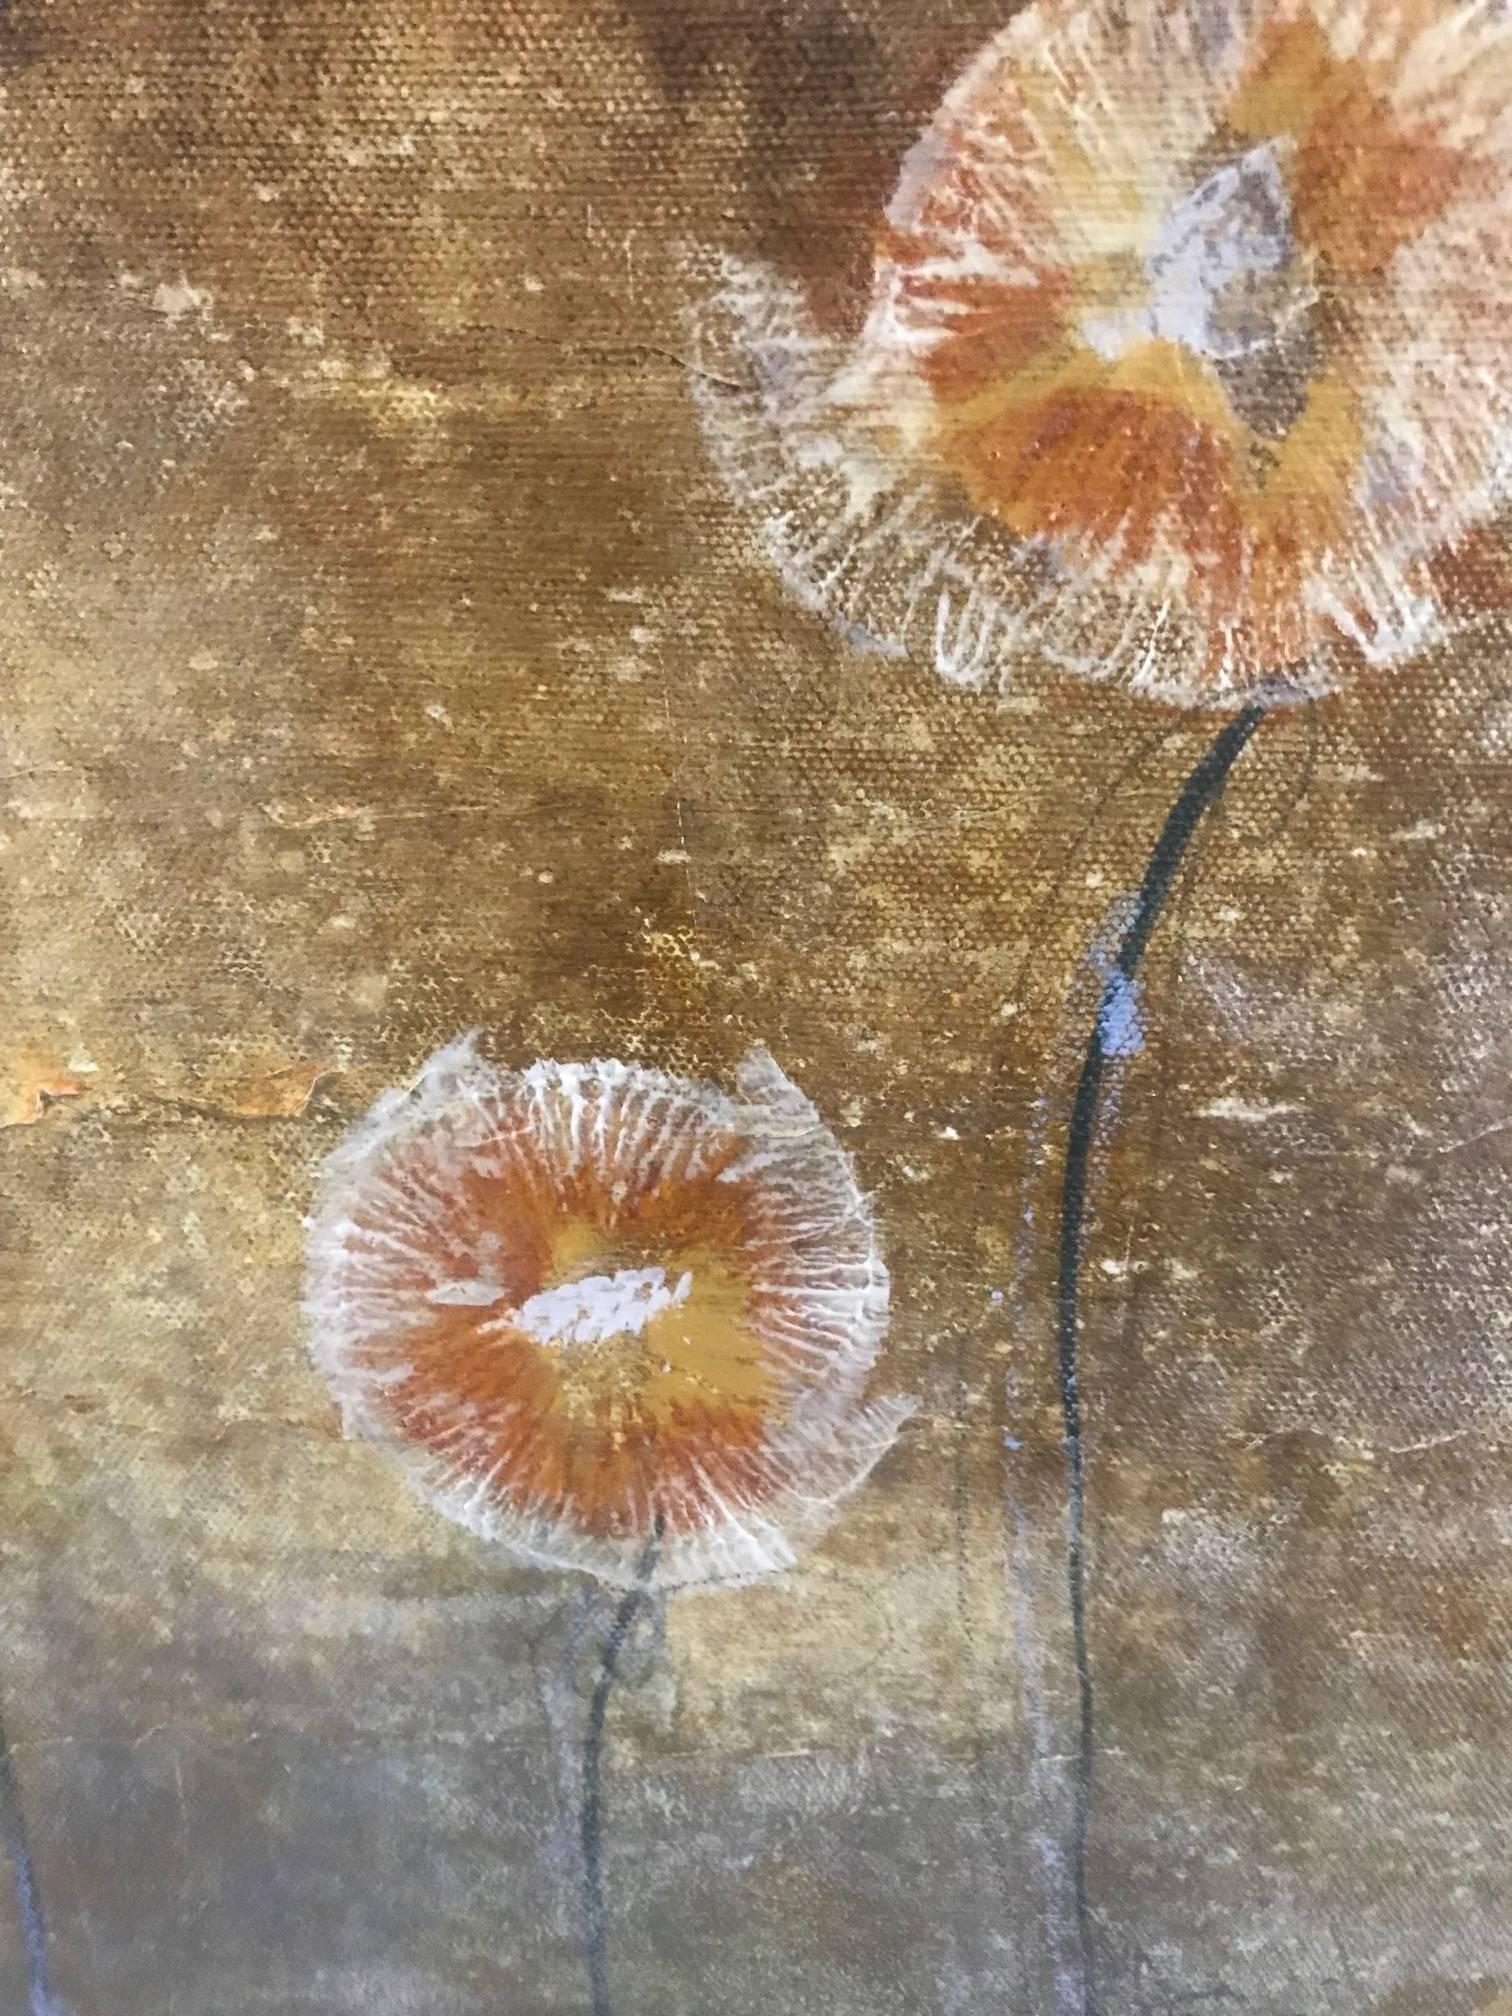 A Maeve Harris original painting titled “Joline”, having a gorgeous gold and silver metallic ground with dandelion like forms in earthy oranges, gold and white.